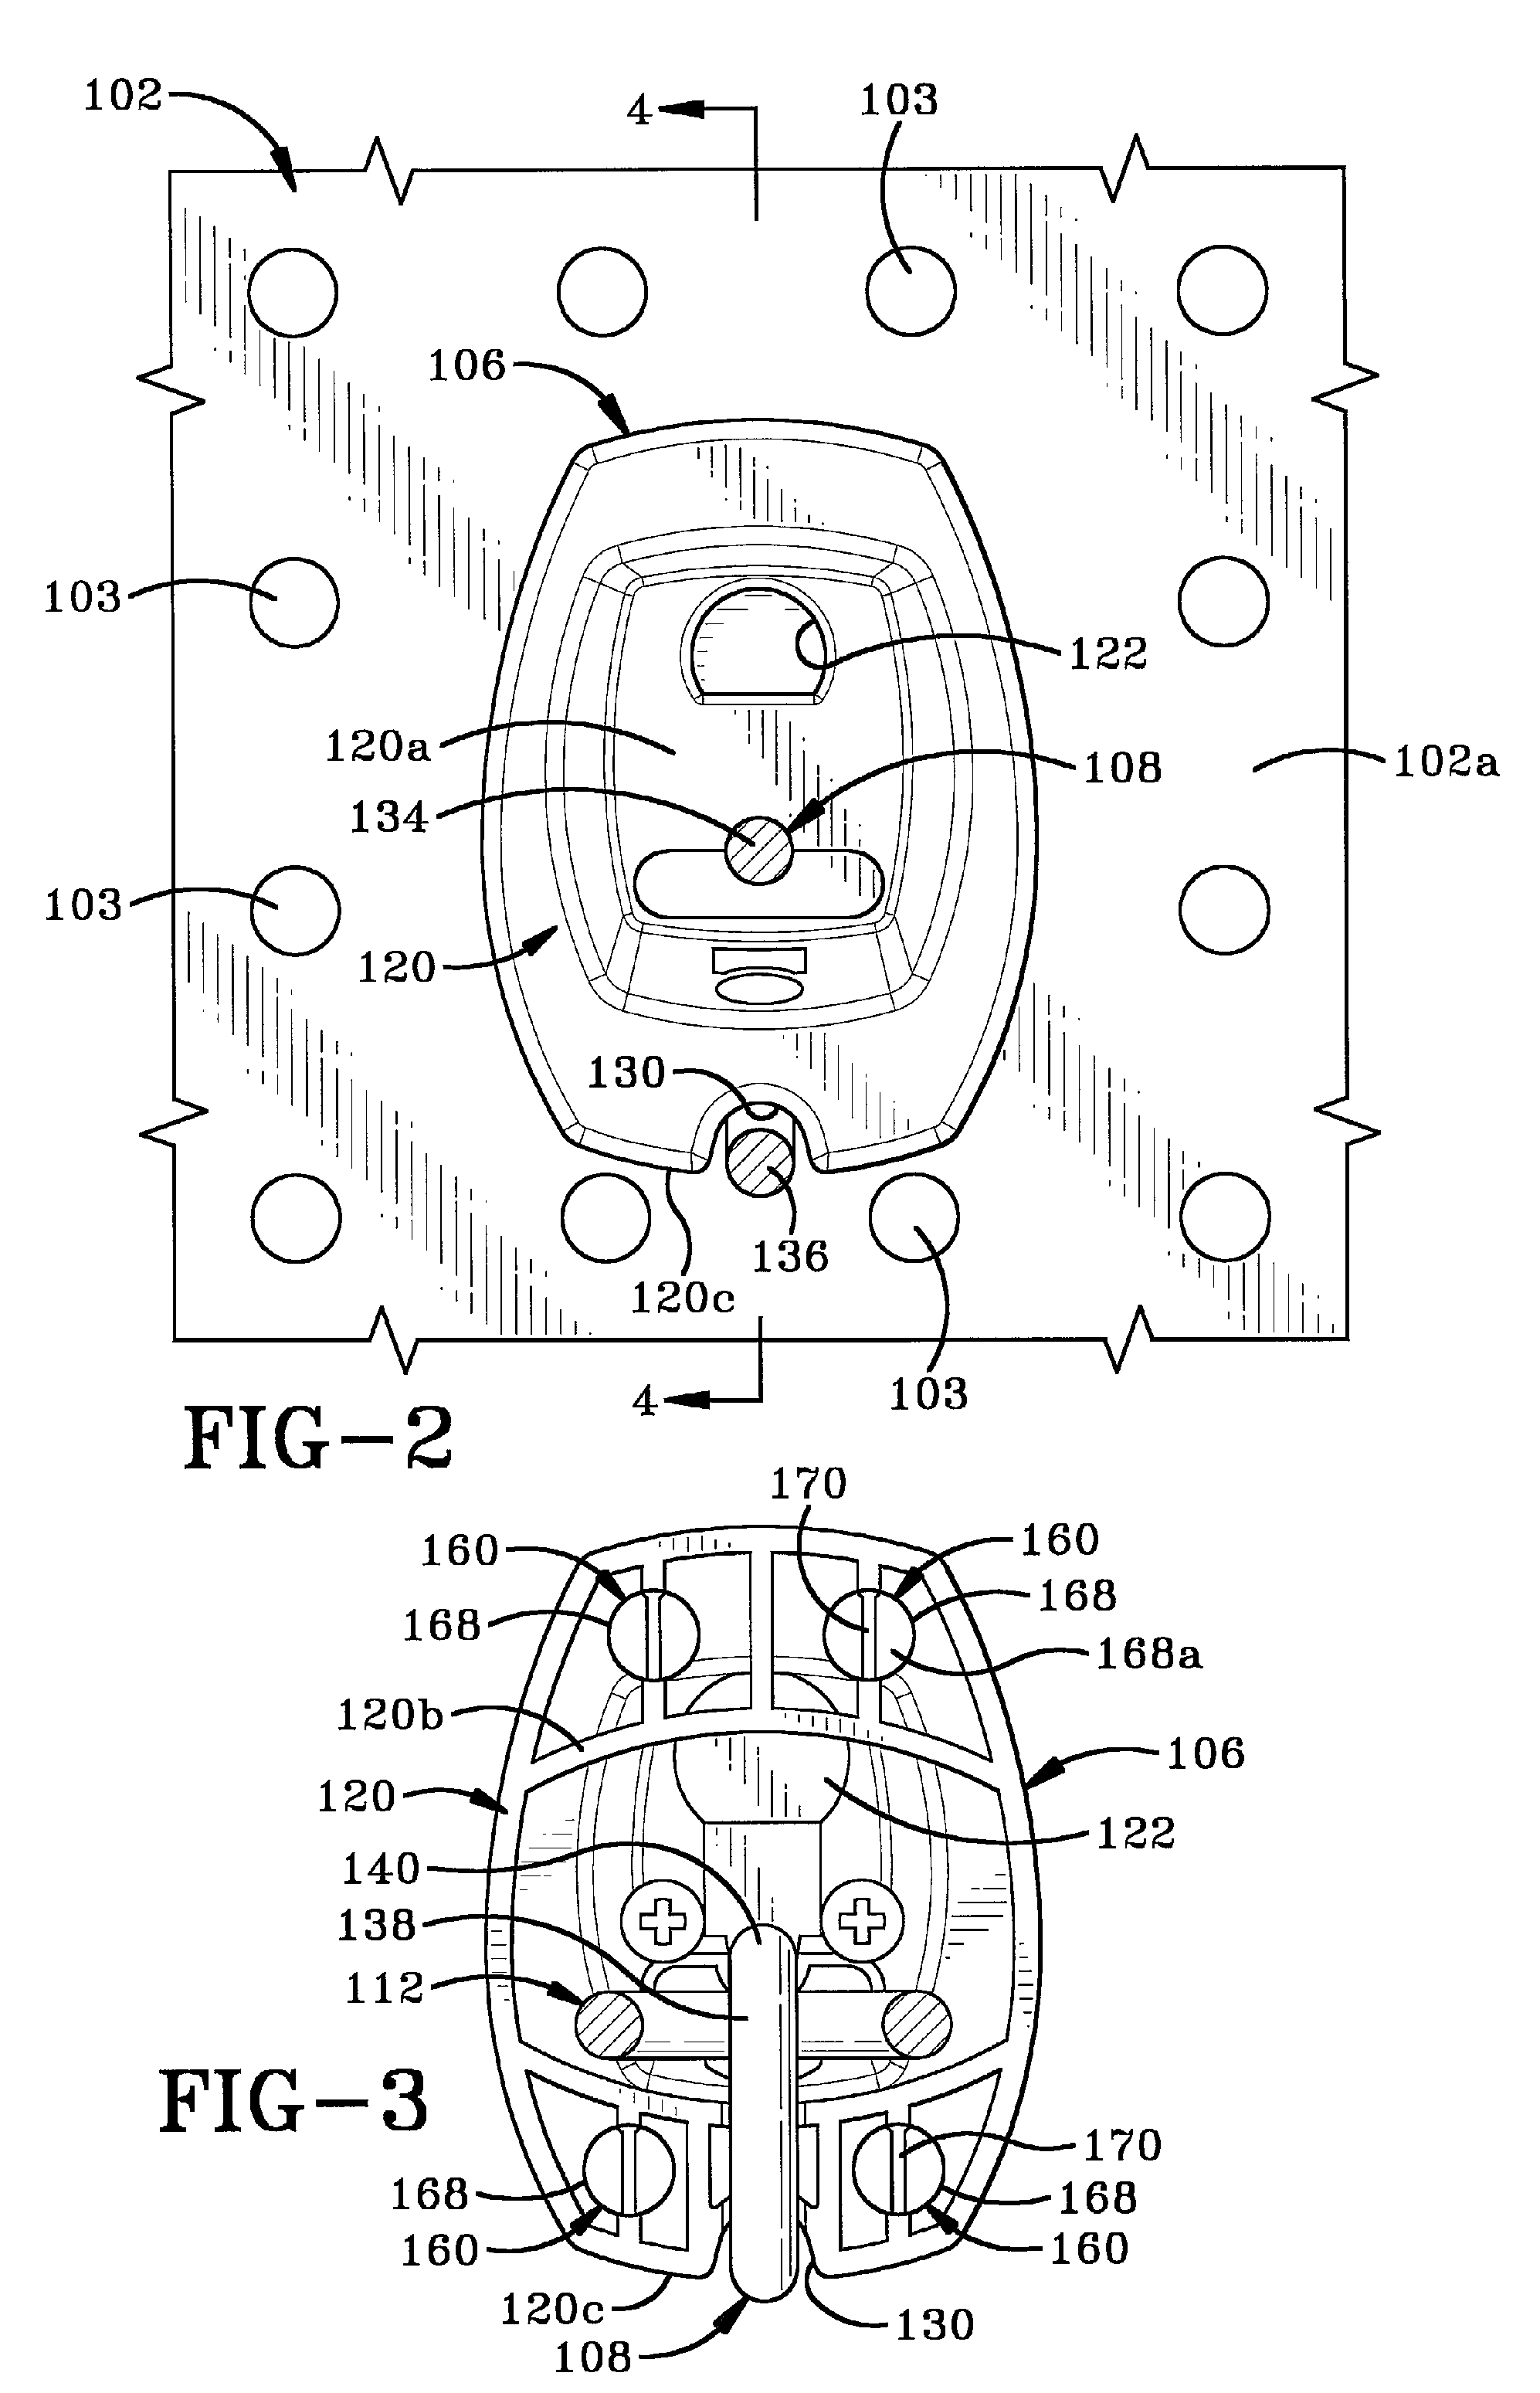 Security device for attaching a peg hook to a peg support